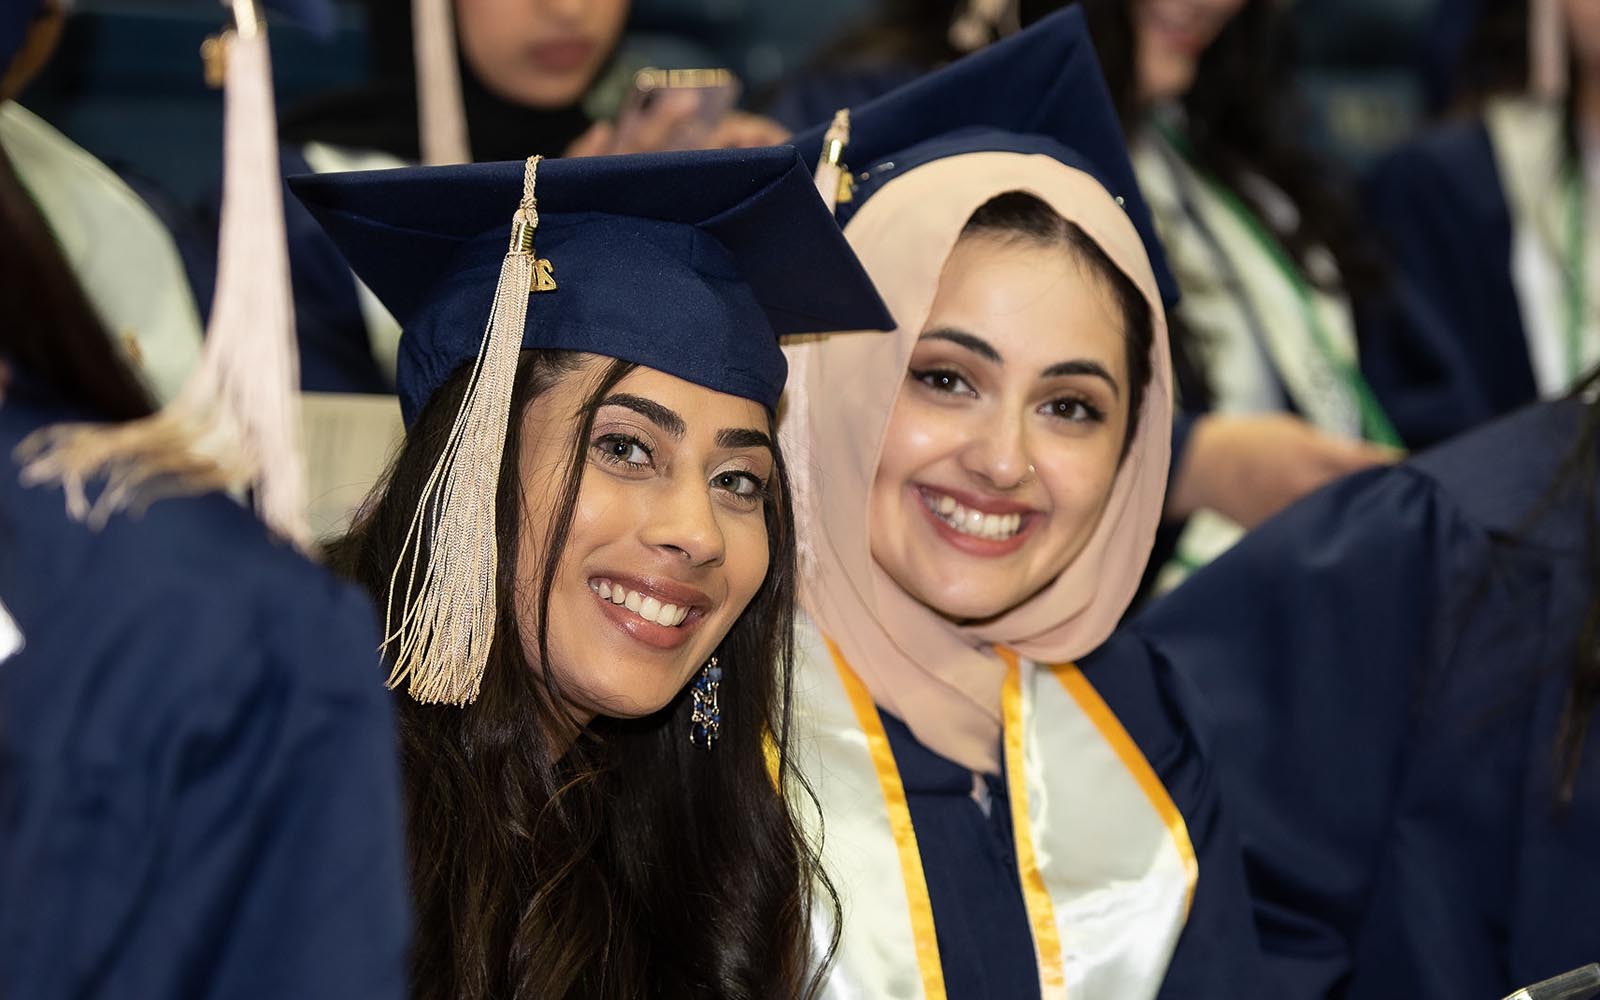 Areesha Khan '22, left and Sahar Sajjad '22, right, both MIS majors, attend the School of Business 2022 Commencement Ceremony at Gampel Pavilion. (Nathan Oldham / UConn School of Business)